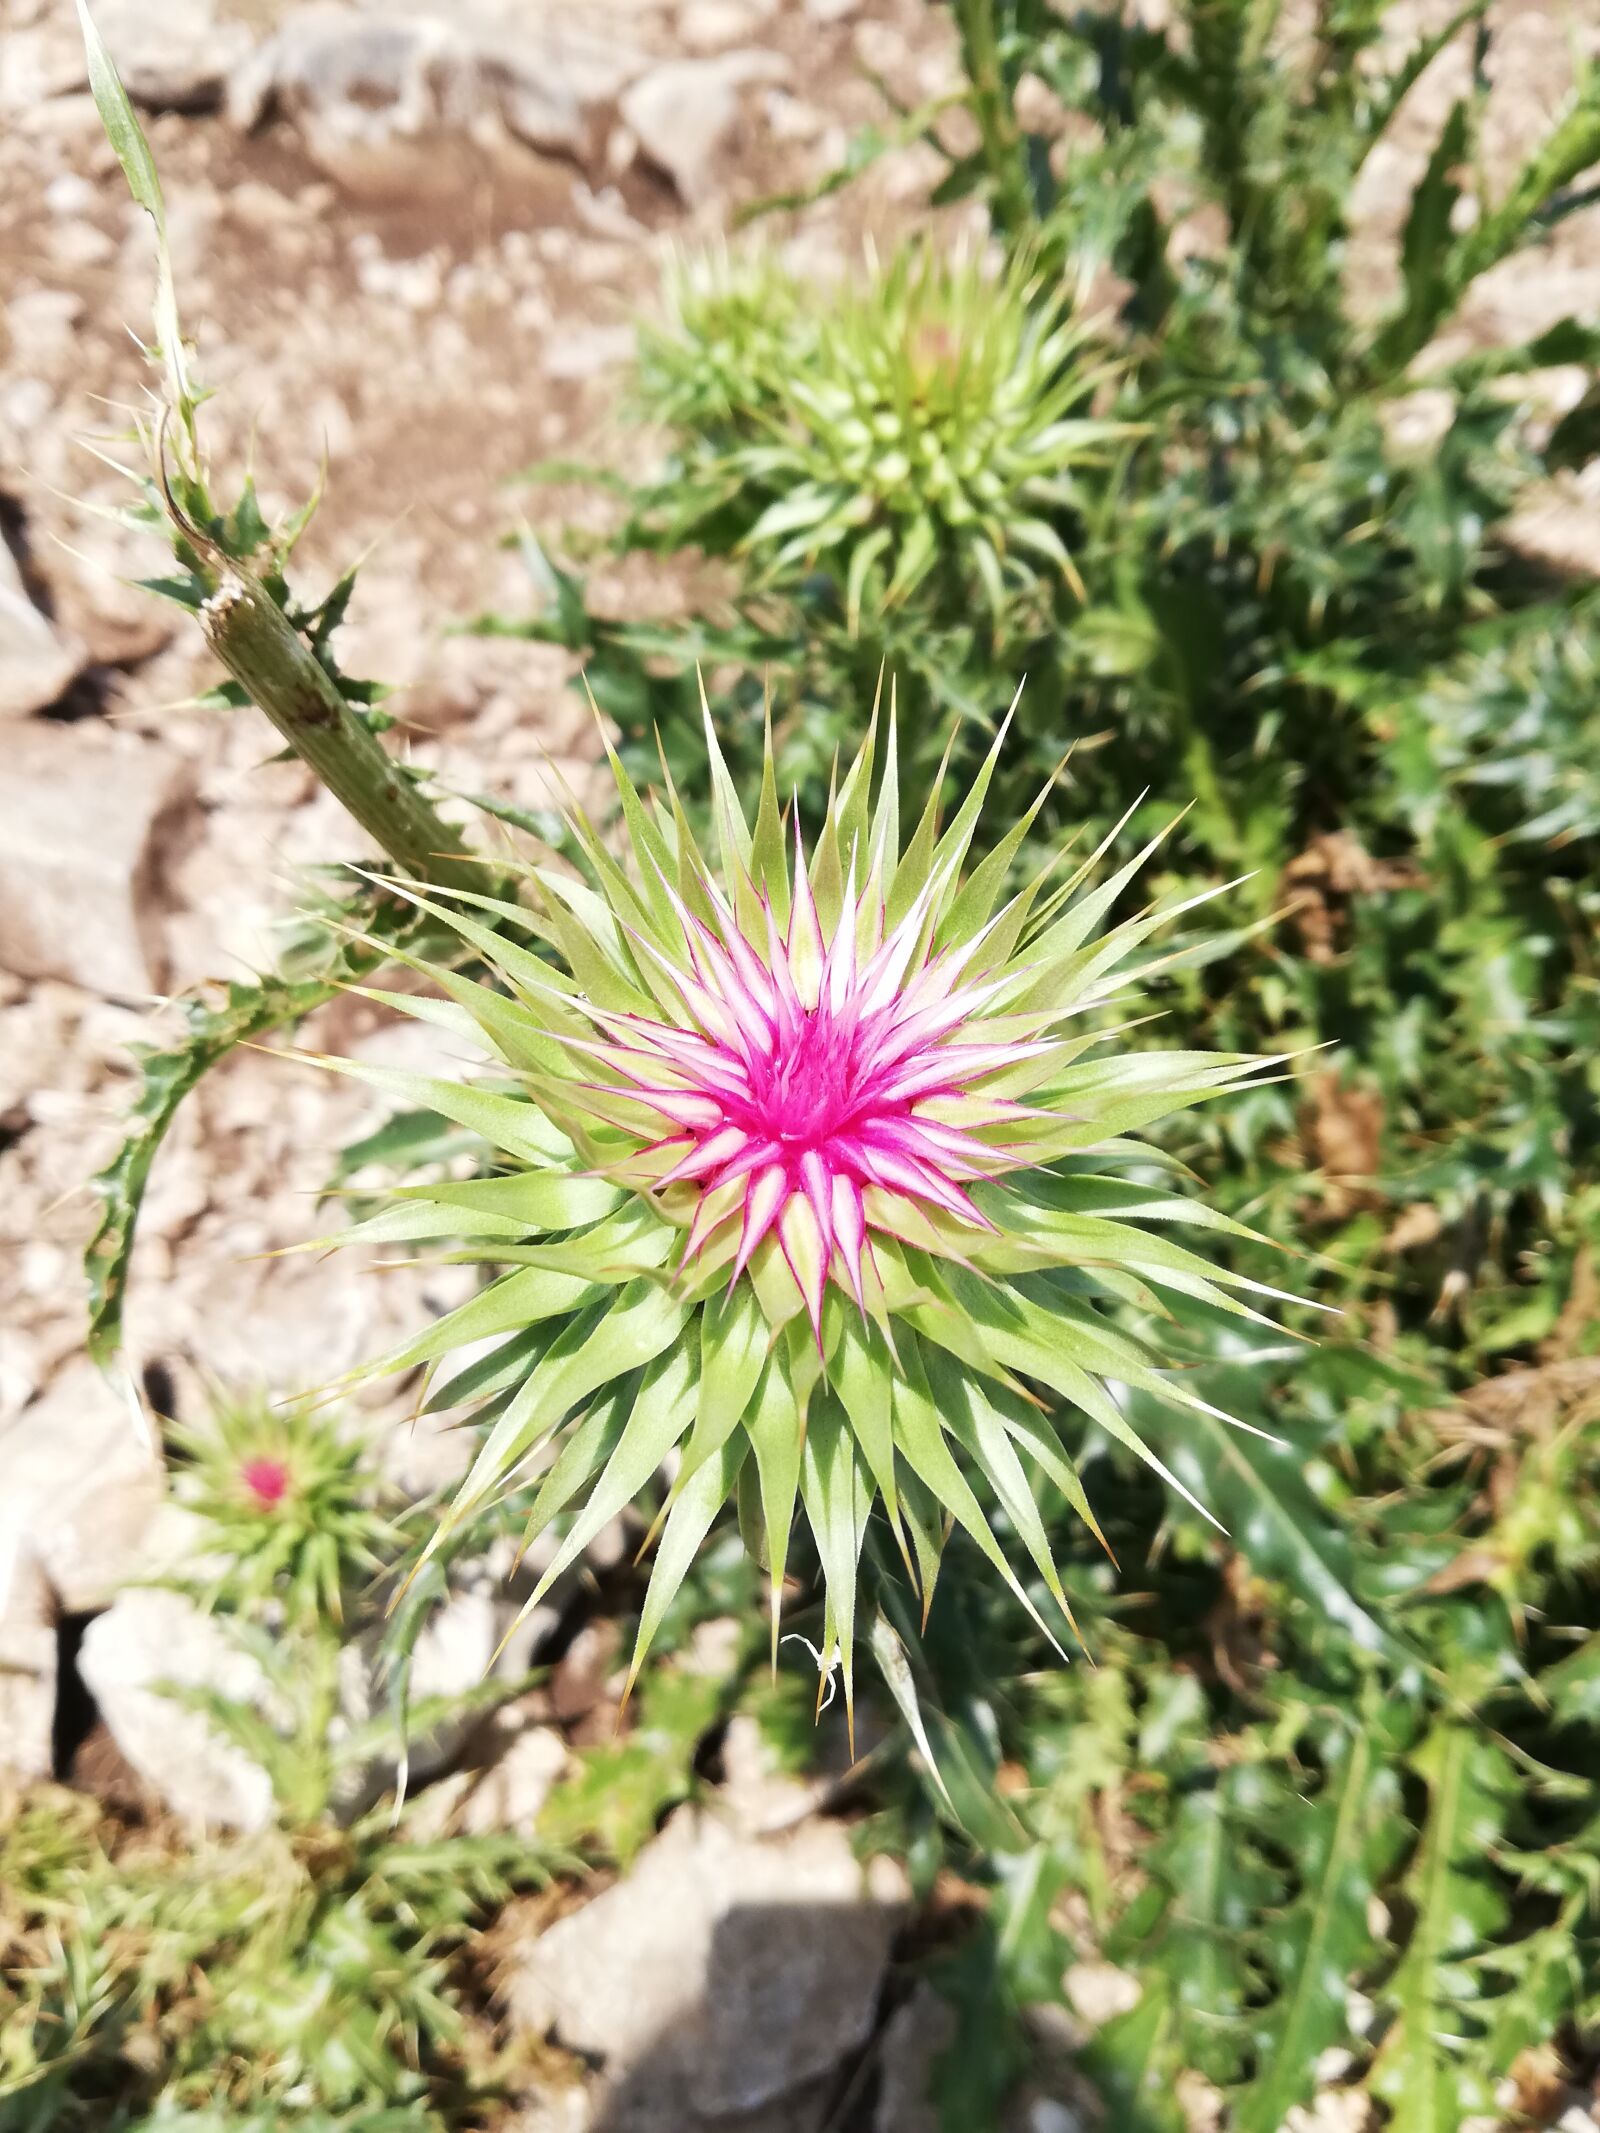 HUAWEI P20 lite sample photo. Plant, thistle, nature photography